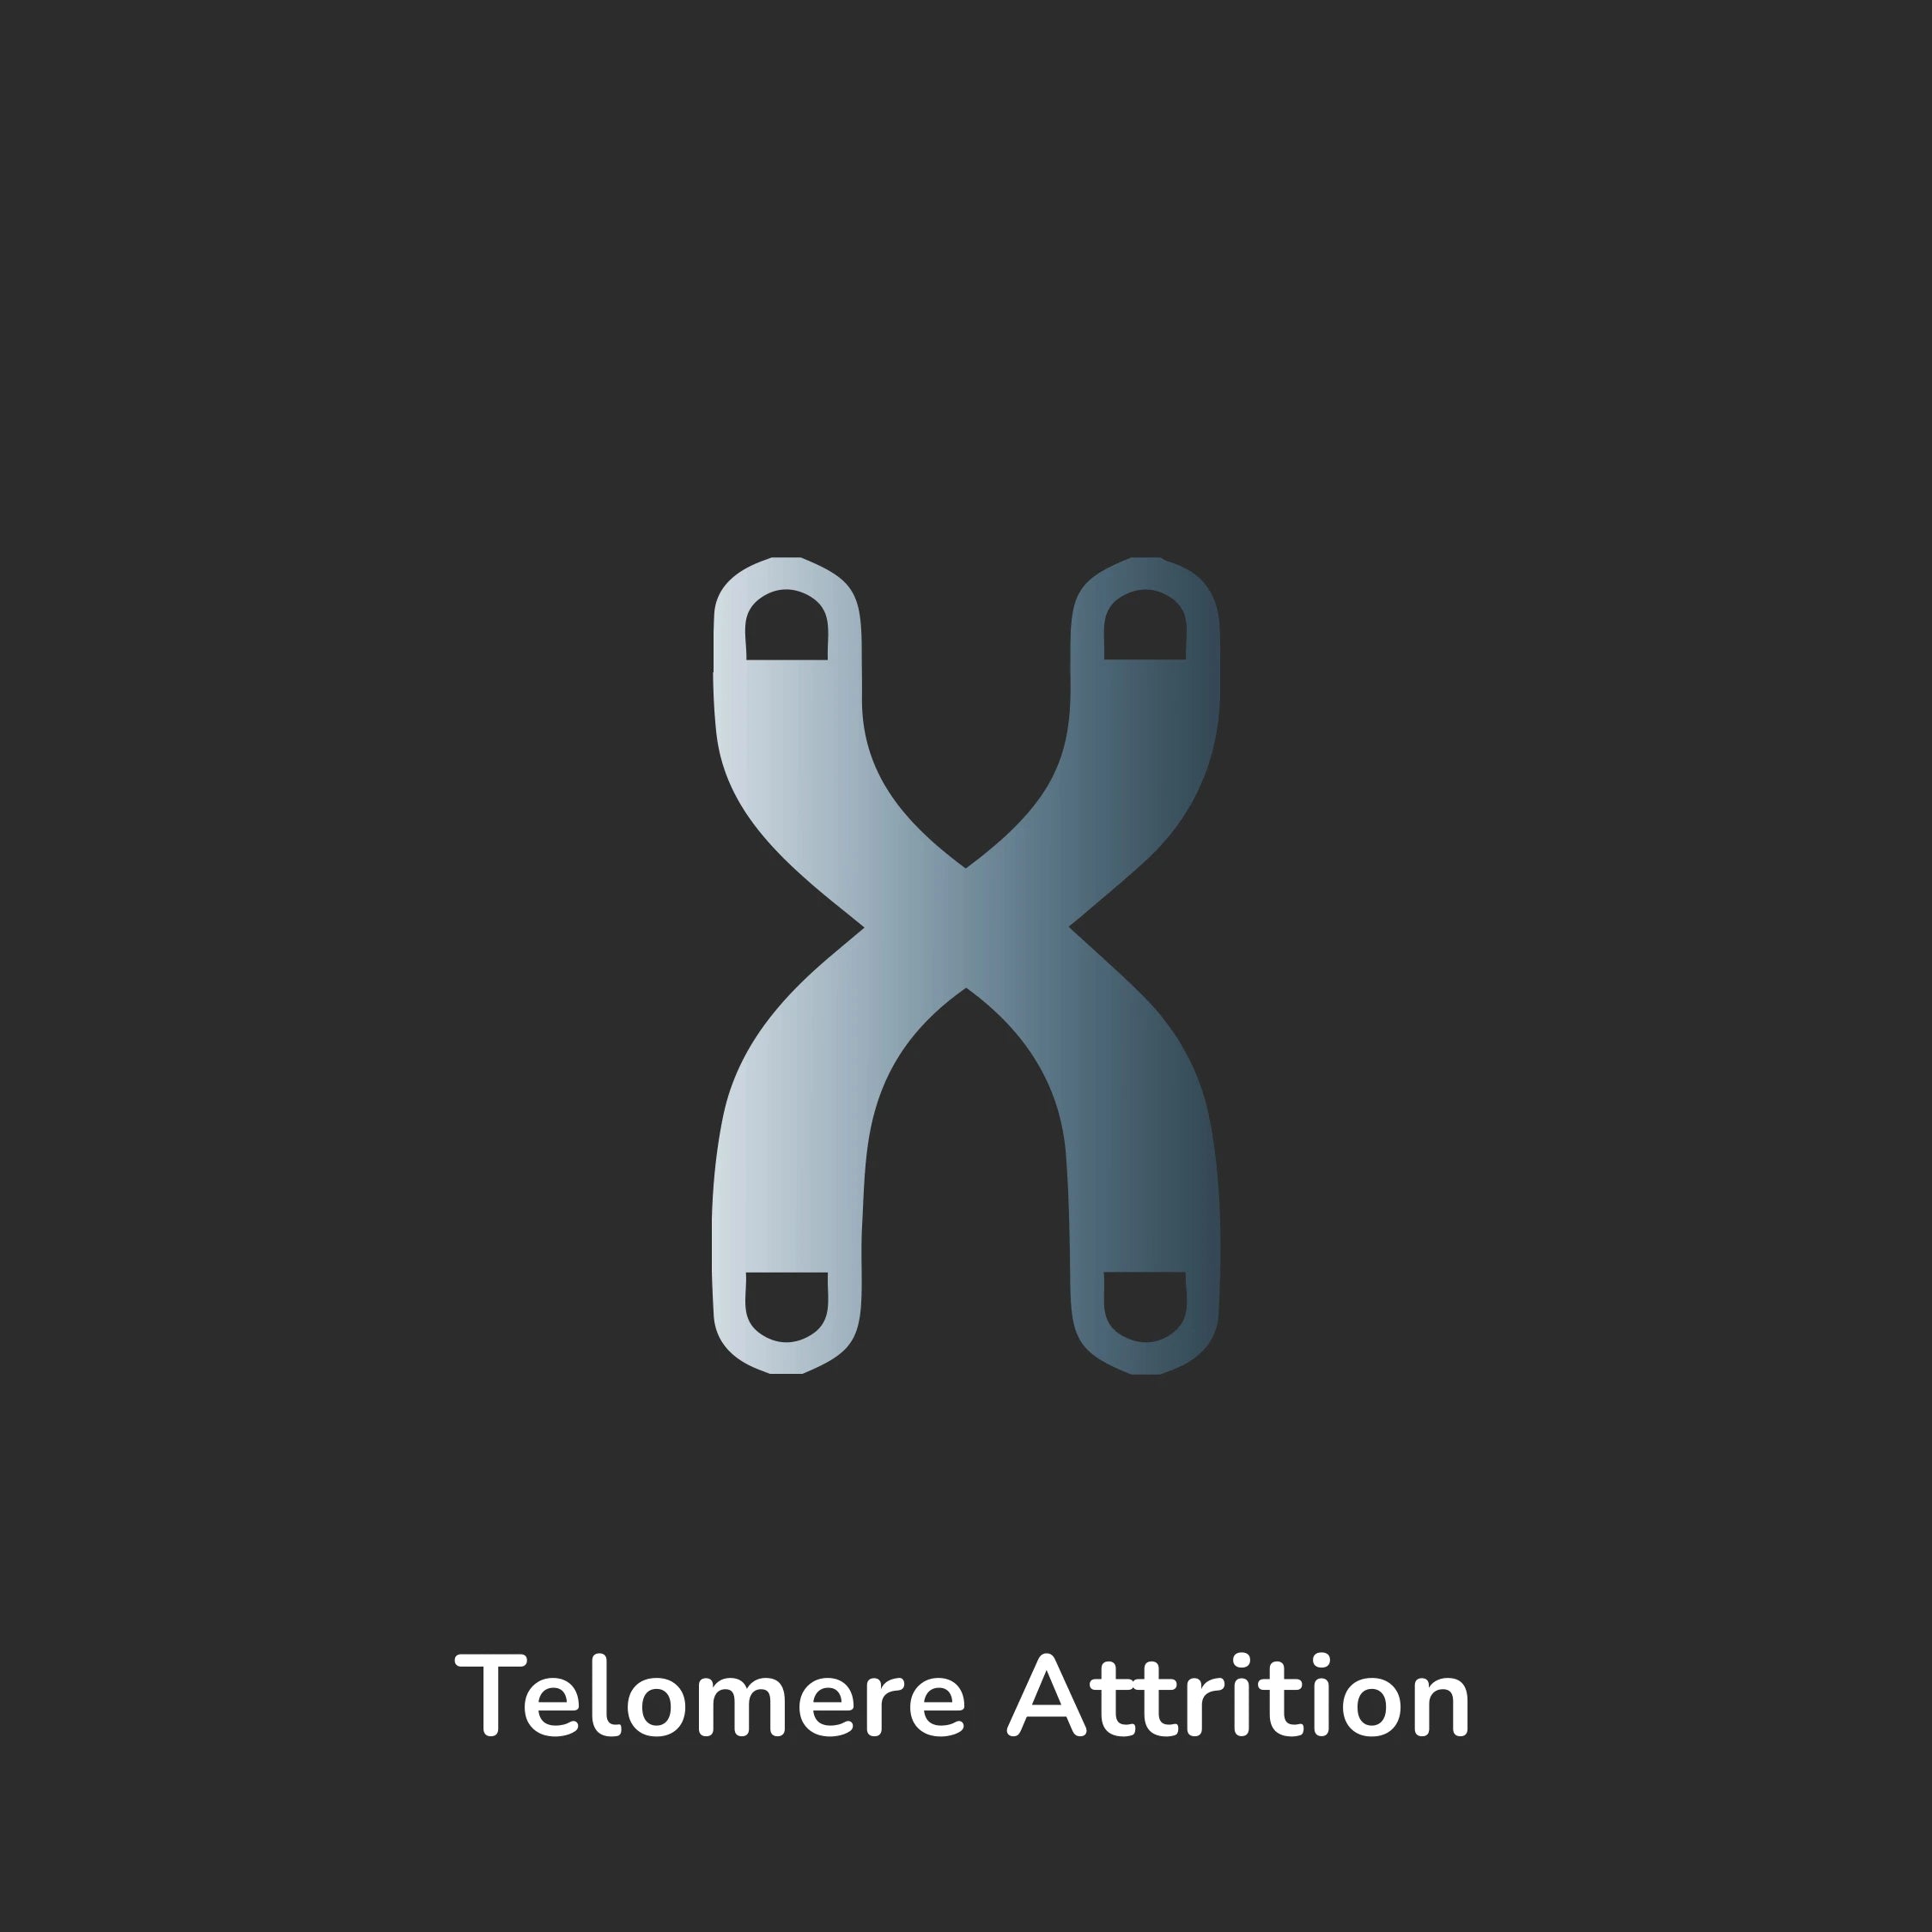 Telomere Attrition Cause of Aging